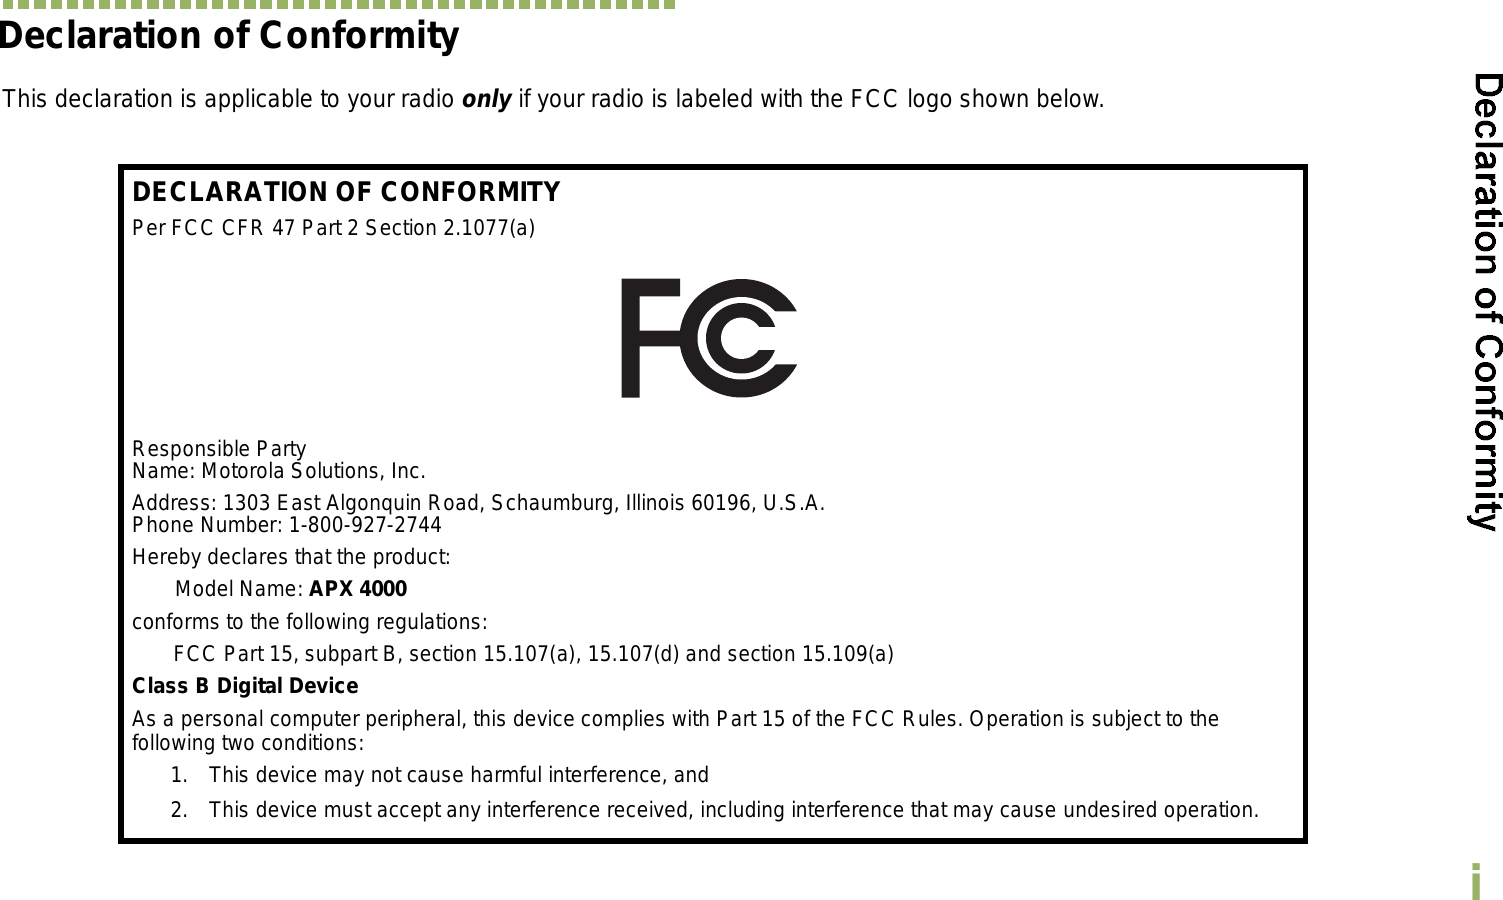 EnglishiDeclaration of Conformity  This declaration is applicable to your radio only if your radio is labeled with the FCC logo shown below.DECLARATION OF CONFORMITYPer FCC CFR 47 Part 2 Section 2.1077(a)Responsible Party Name: Motorola Solutions, Inc.Address: 1303 East Algonquin Road, Schaumburg, Illinois 60196, U.S.A.Phone Number: 1-800-927-2744Hereby declares that the product:Model Name: APX 4000conforms to the following regulations:FCC Part 15, subpart B, section 15.107(a), 15.107(d) and section 15.109(a)Class B Digital DeviceAs a personal computer peripheral, this device complies with Part 15 of the FCC Rules. Operation is subject to the following two conditions:1. This device may not cause harmful interference, and 2. This device must accept any interference received, including interference that may cause undesired operation.